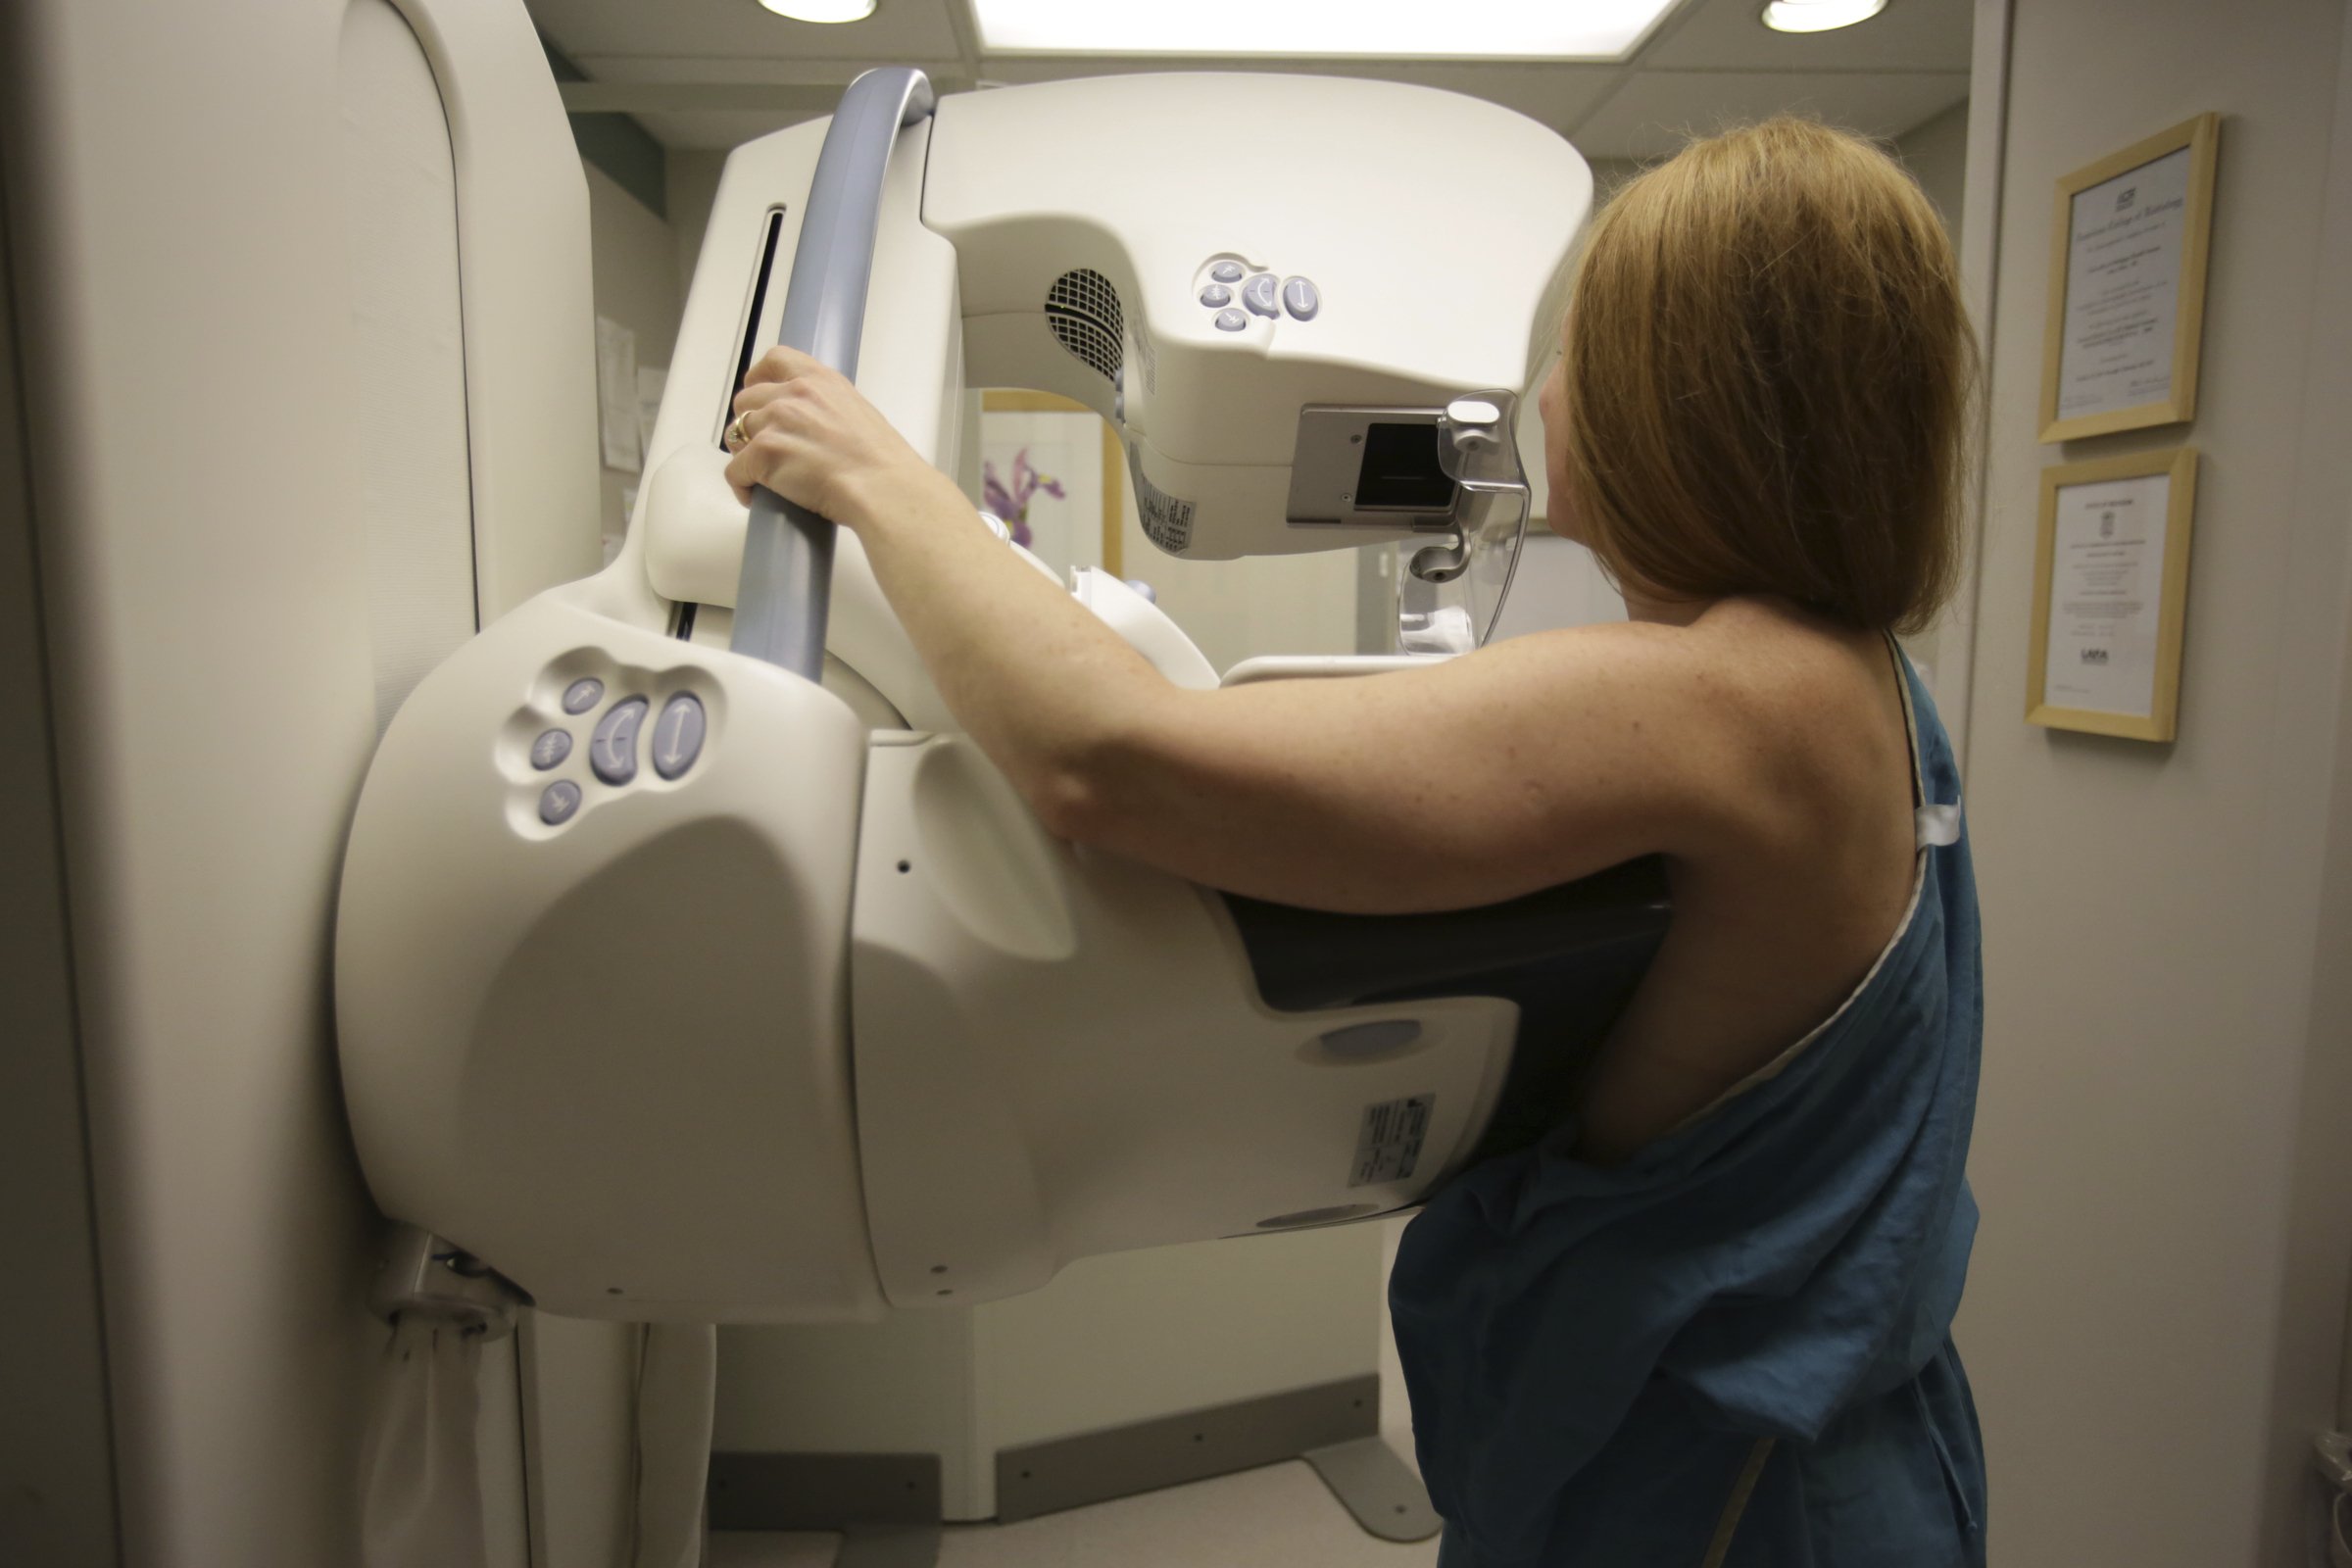 New studies clarify which genes may increase the risk of breast cancer